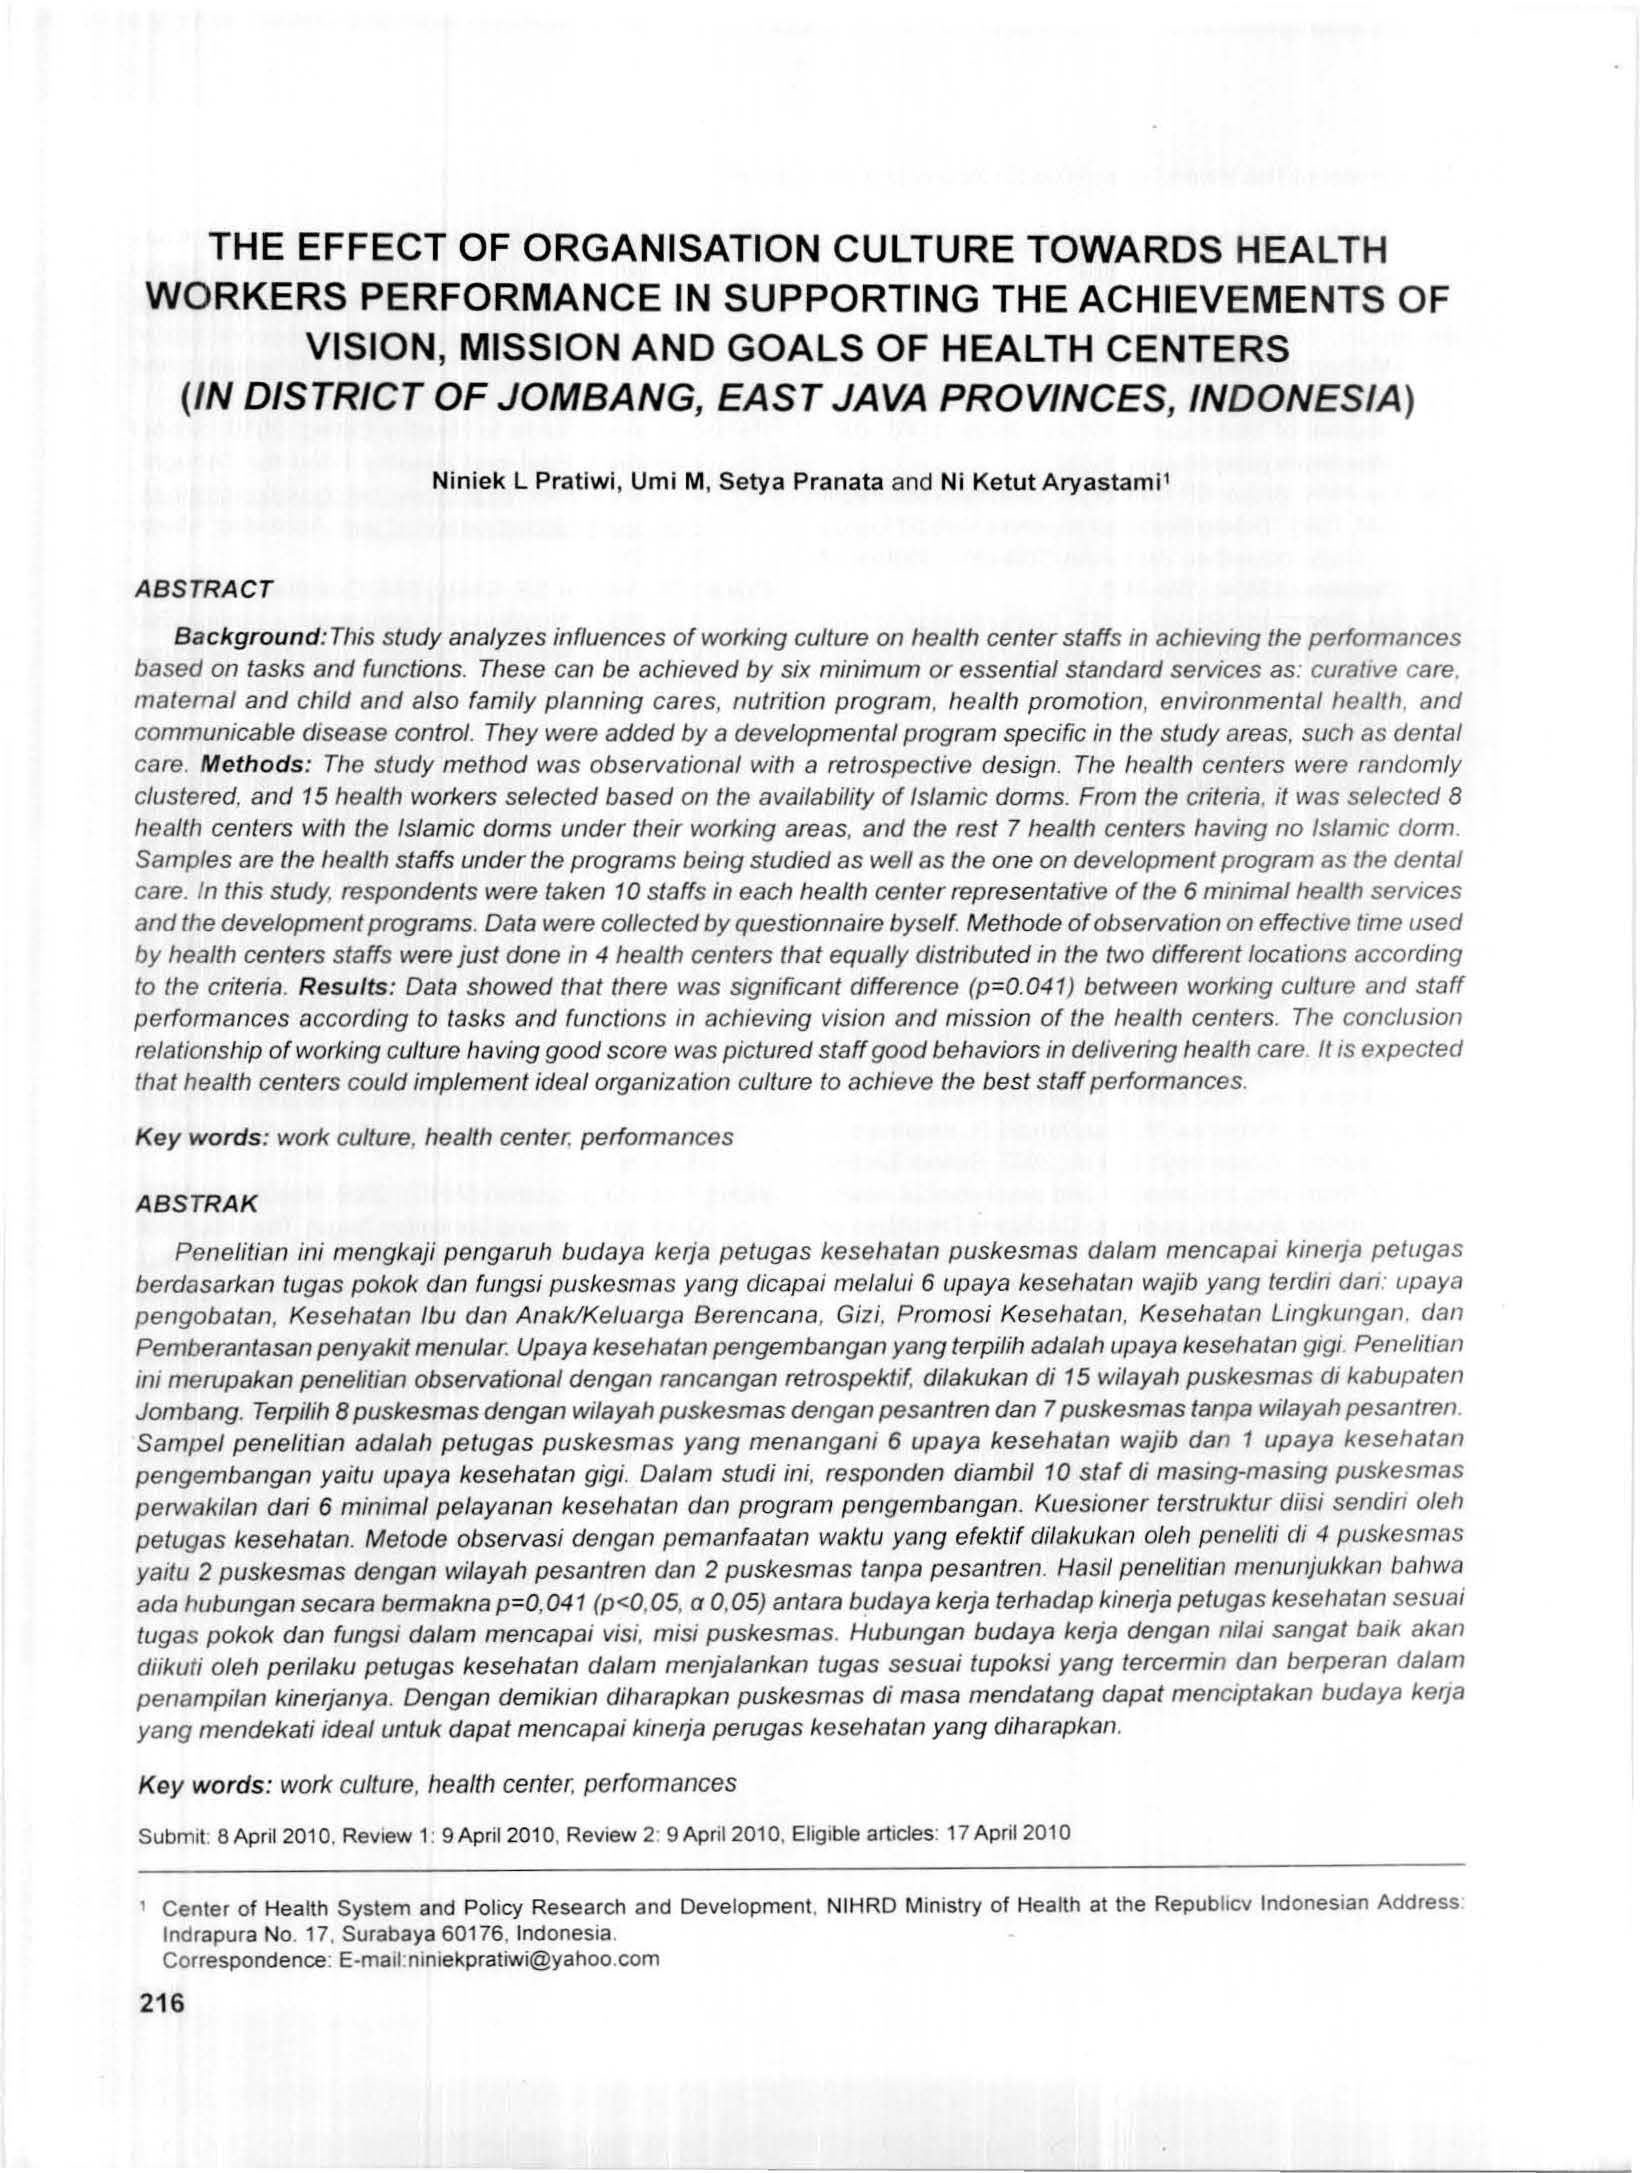 THE EFFECT OF ORGANISATION CULTURE TOWARDS HEALTH WORKERS PERFORMANCE IN SUPPORTING THE ACHIEVEMENTS OF VISION, MISSION AND GOALS OF HEALTH CENTERS (IN DISTRICT OF JOMBANG, EAST JAVA PROVINCES,